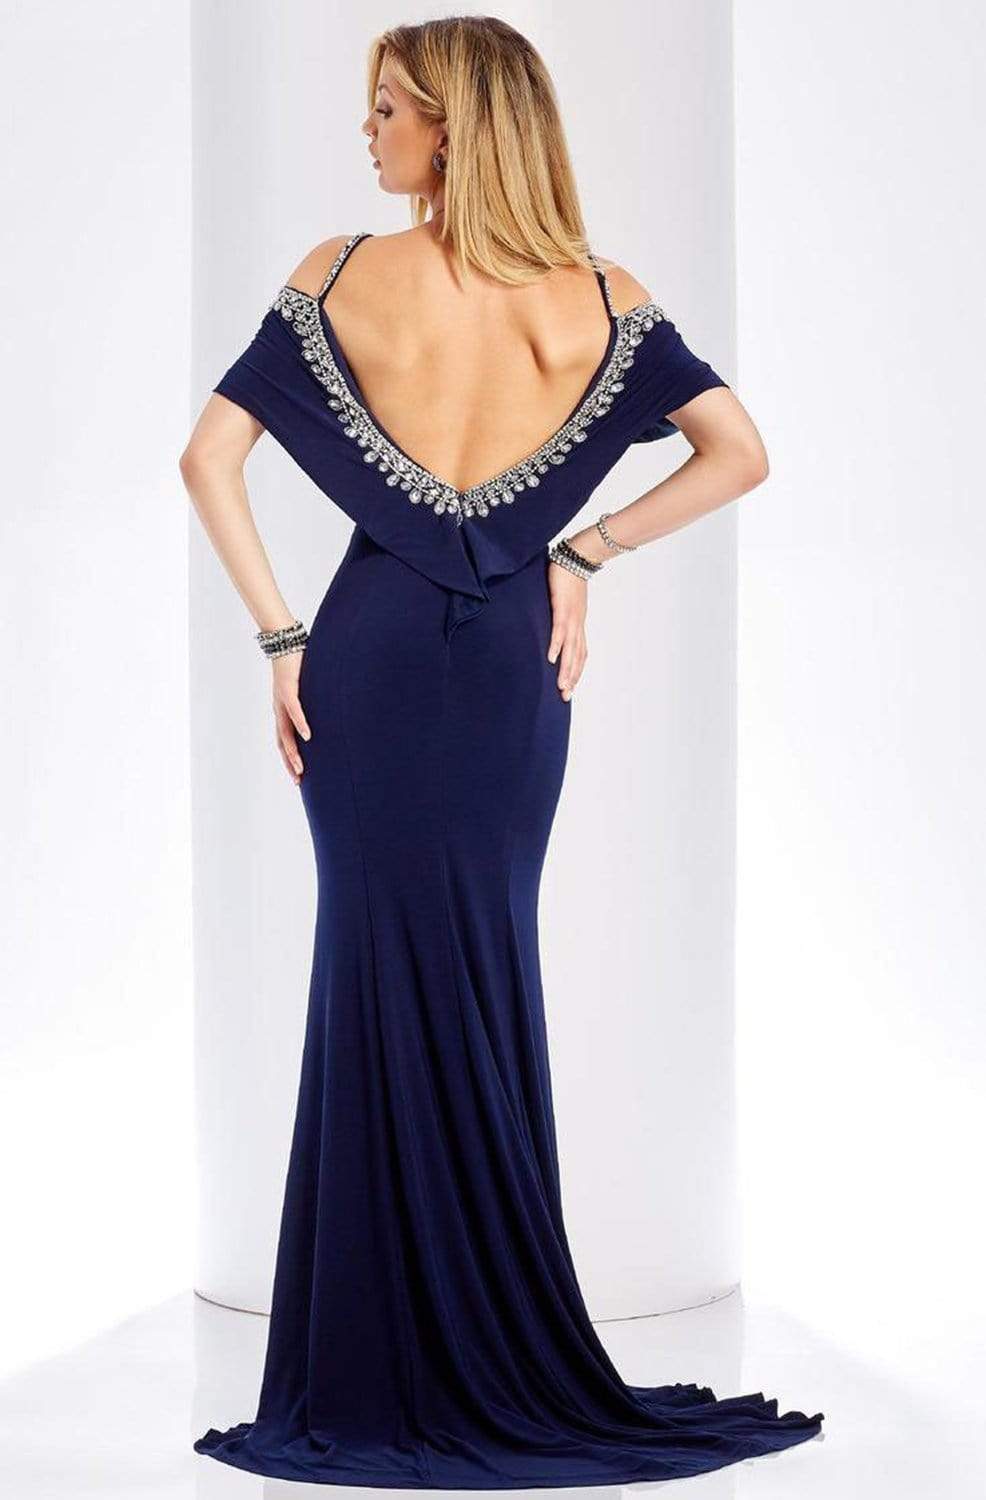 Clarisse - 3497 Jeweled Scoop Neck Sheath Dress Special Occasion Dress 0 / Navy